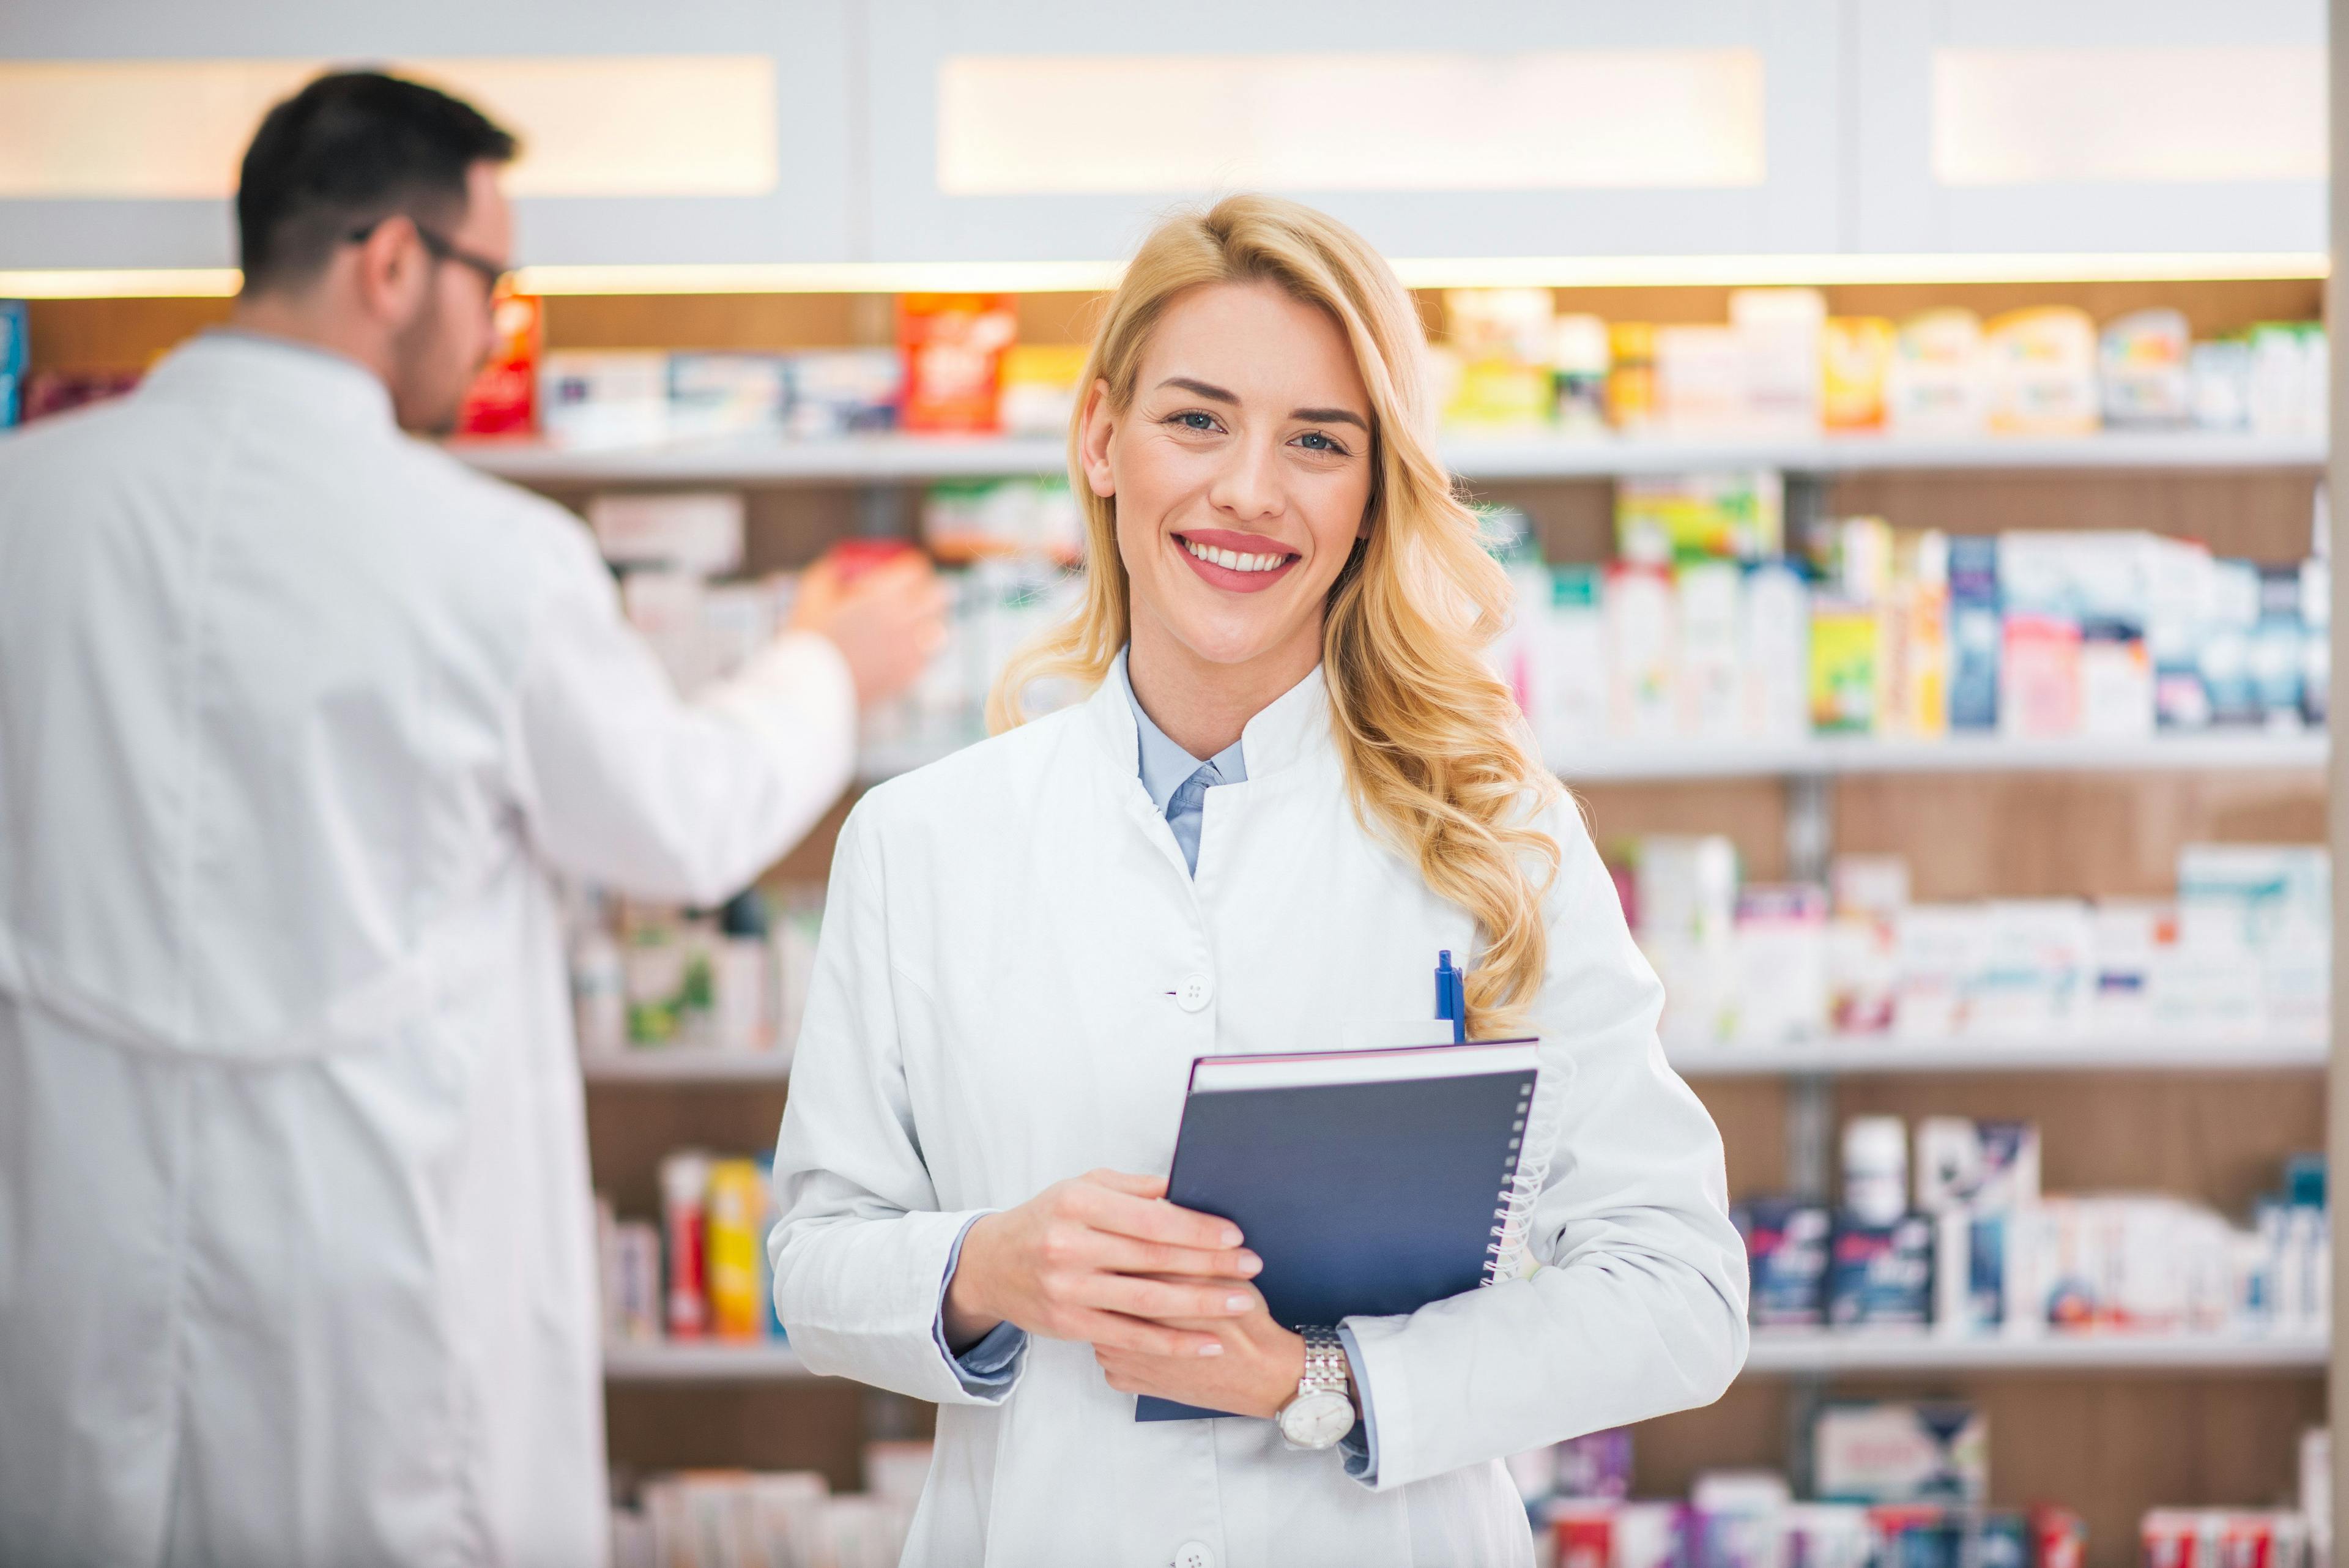 Portrait of a smiling female pharmacist, male colleague working with drugs in the background- Image credit: Bnenin | stock.adobe.com